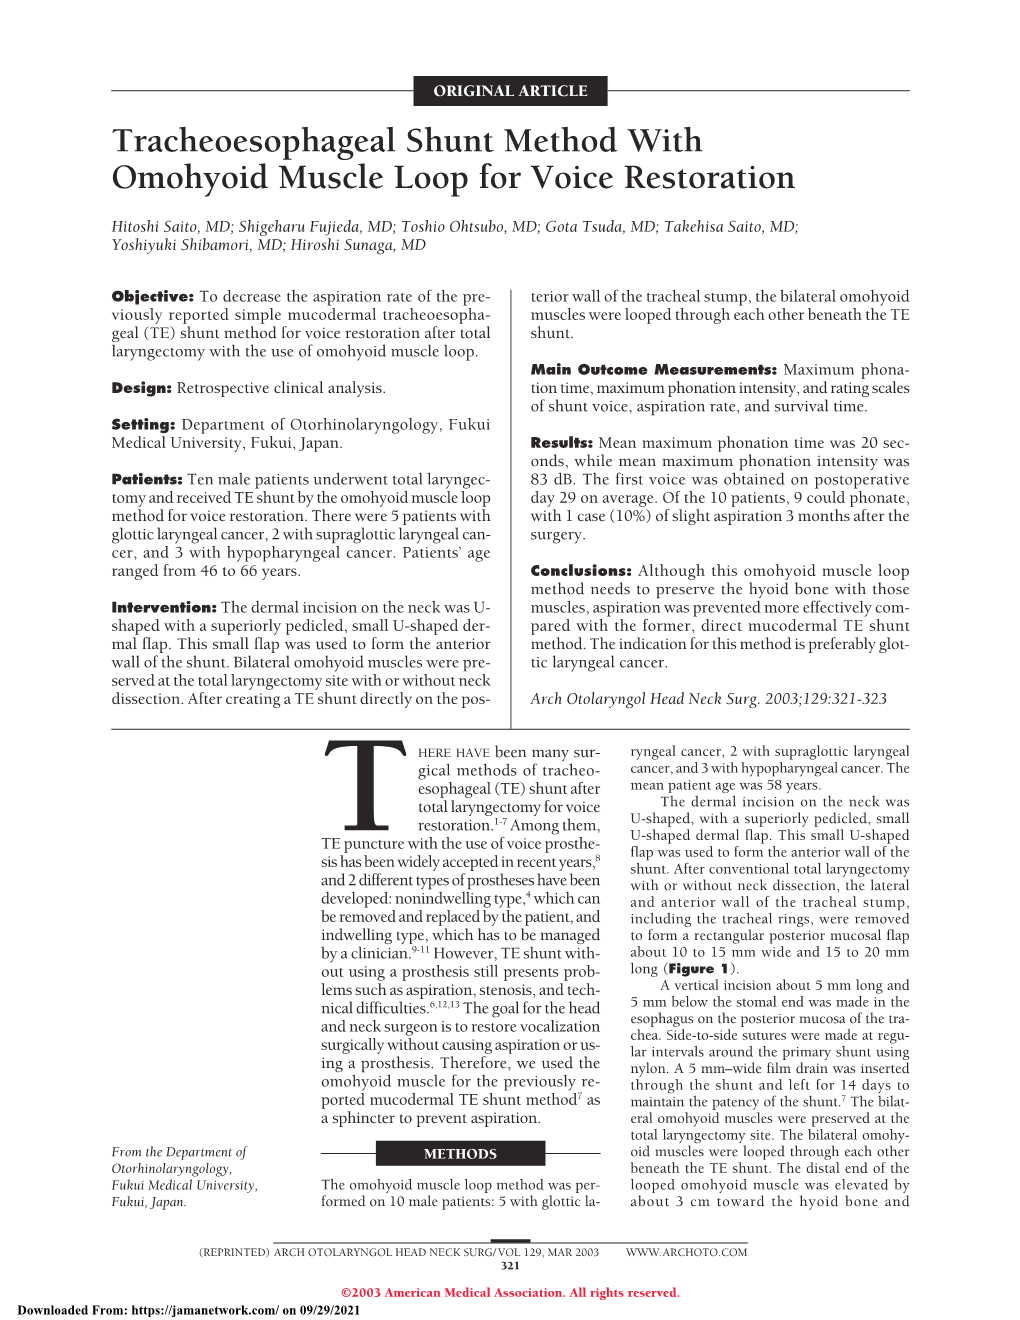 Tracheoesophageal Shunt Method with Omohyoid Muscle Loop for Voice Restoration